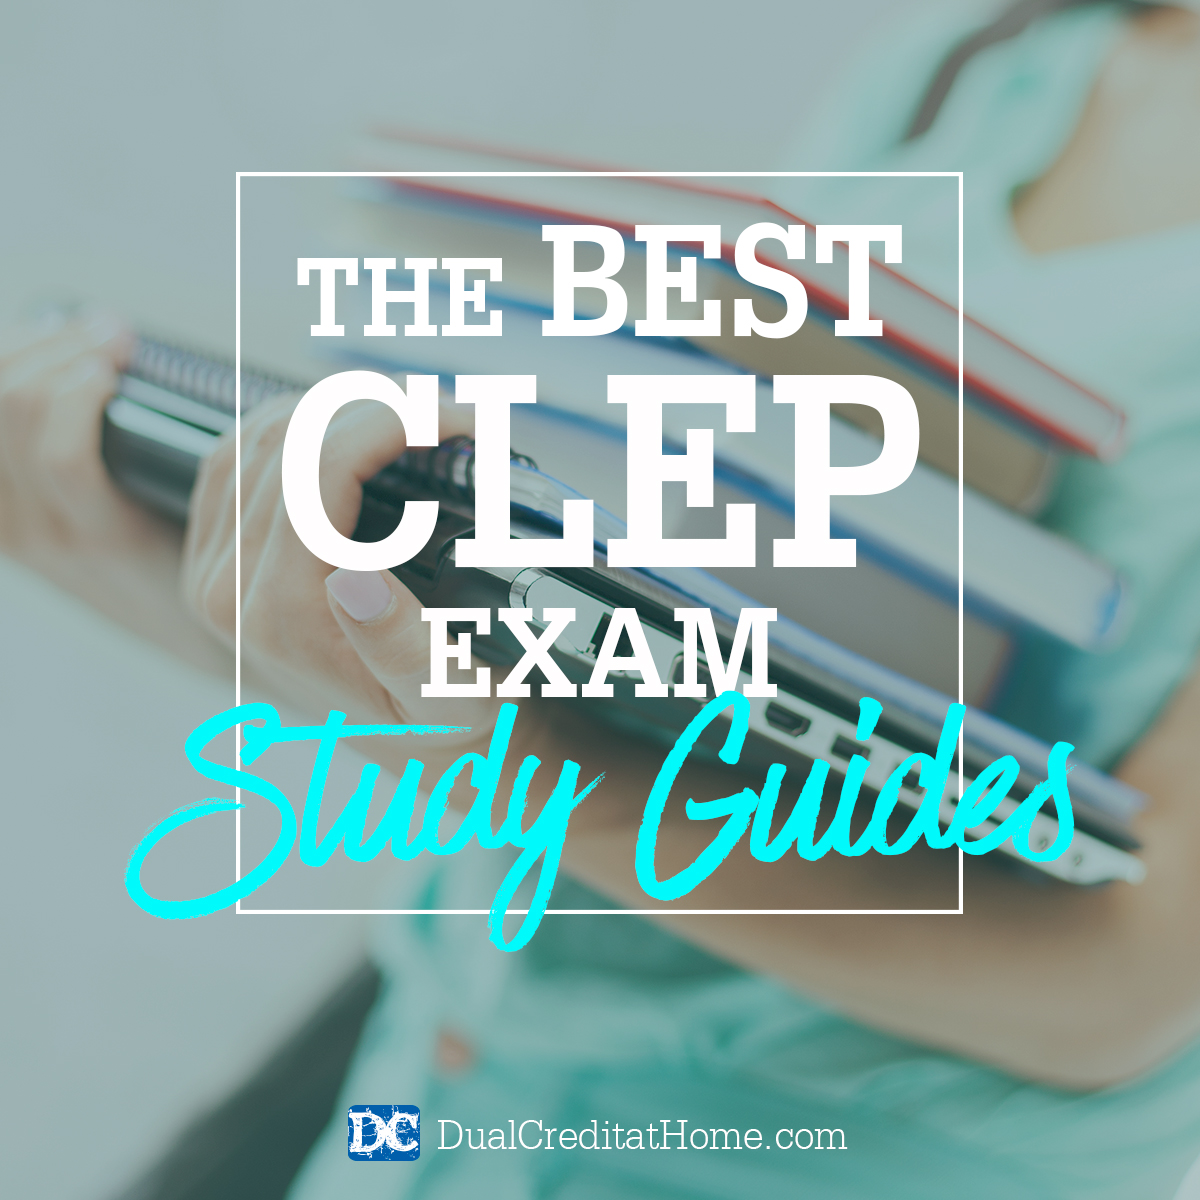 The Best CLEP Exam Study Guides